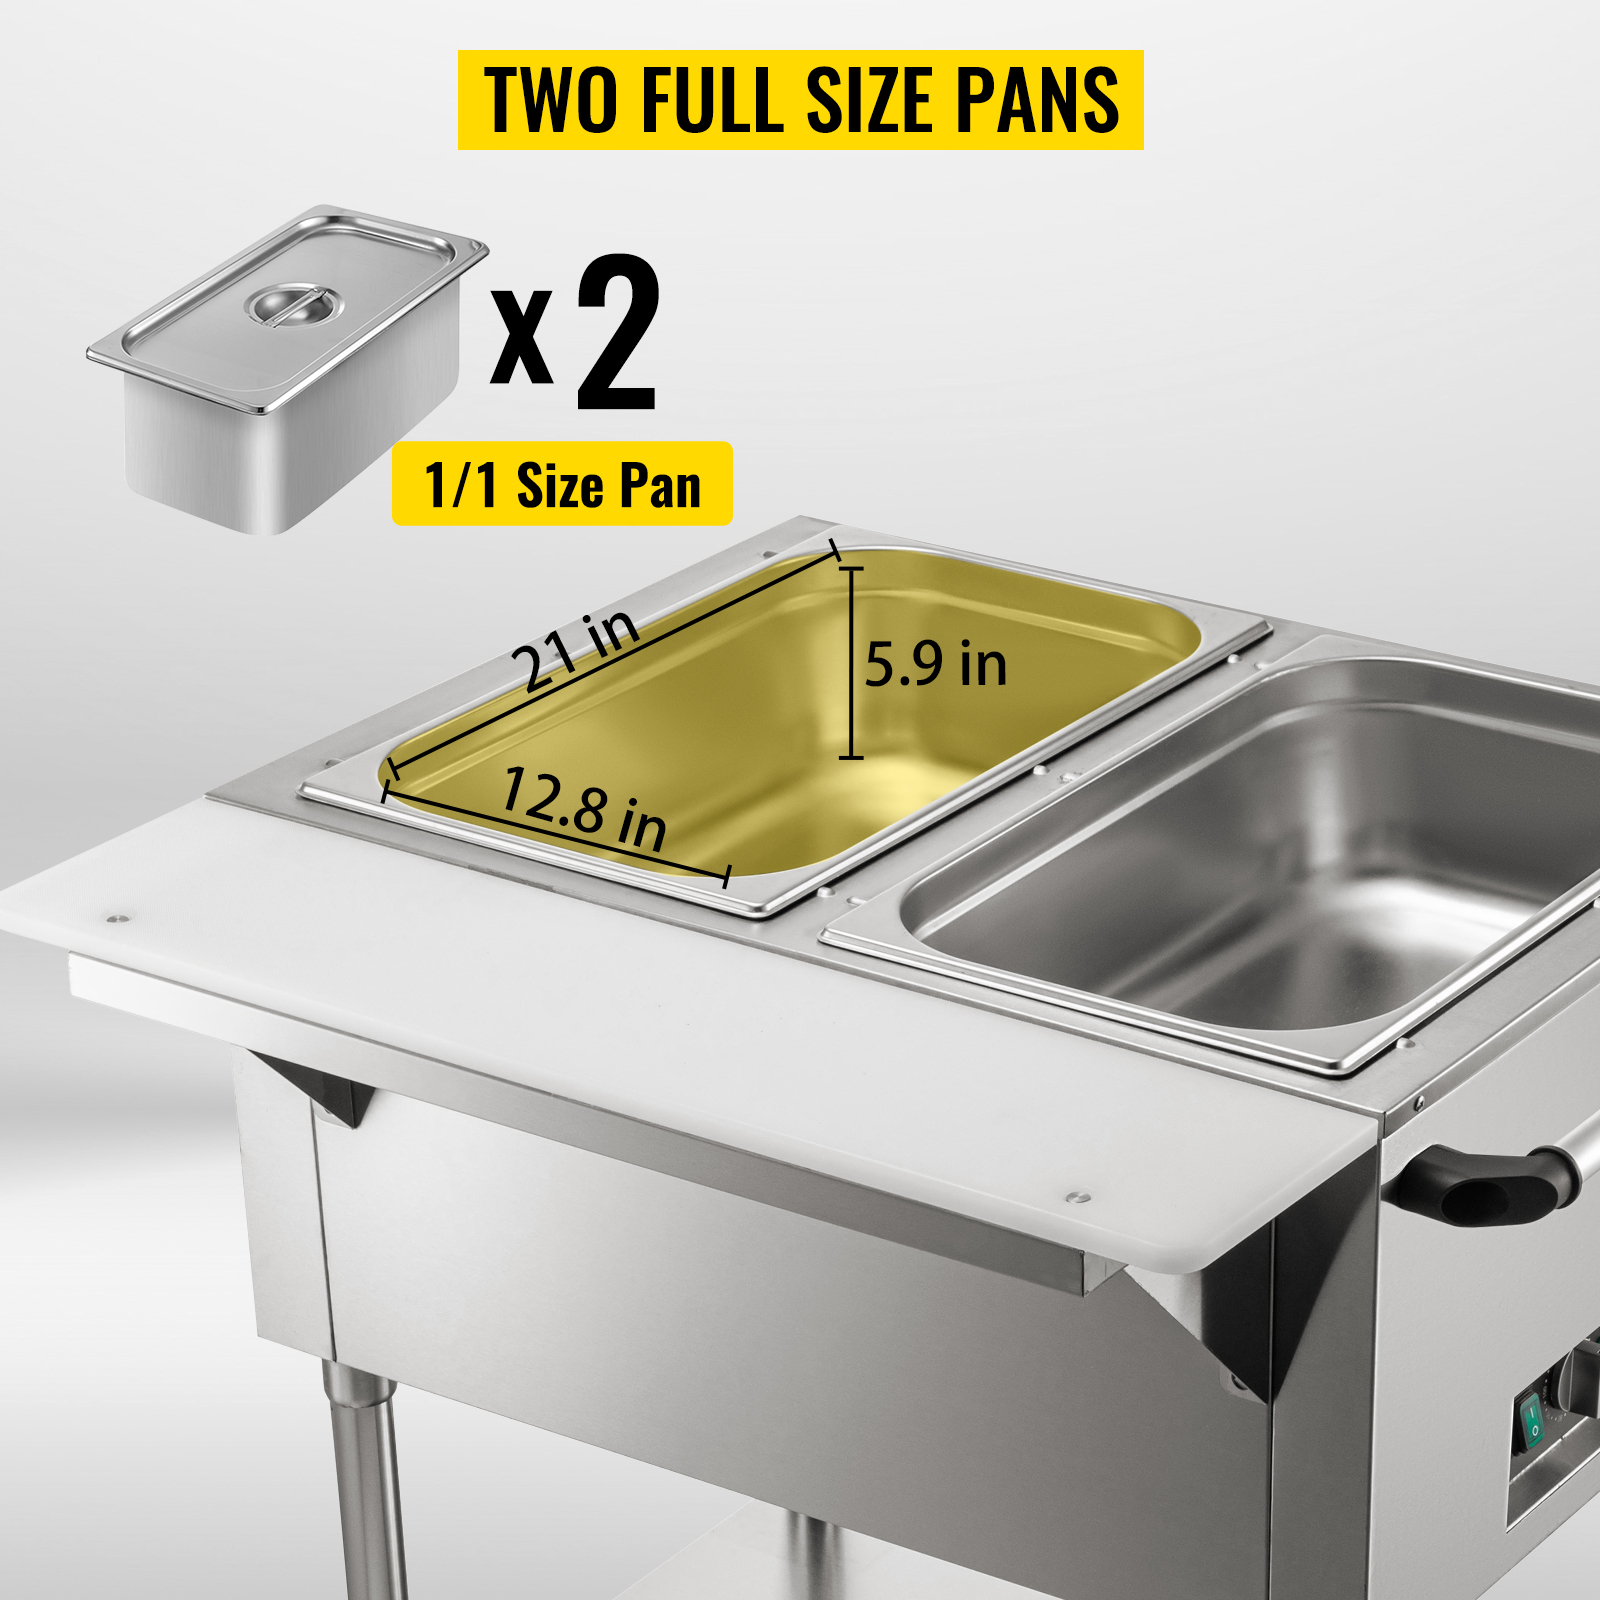 VEVOR 4 Pan x 1/2 GN Stainless Steel Commercial Food Steam Table 6